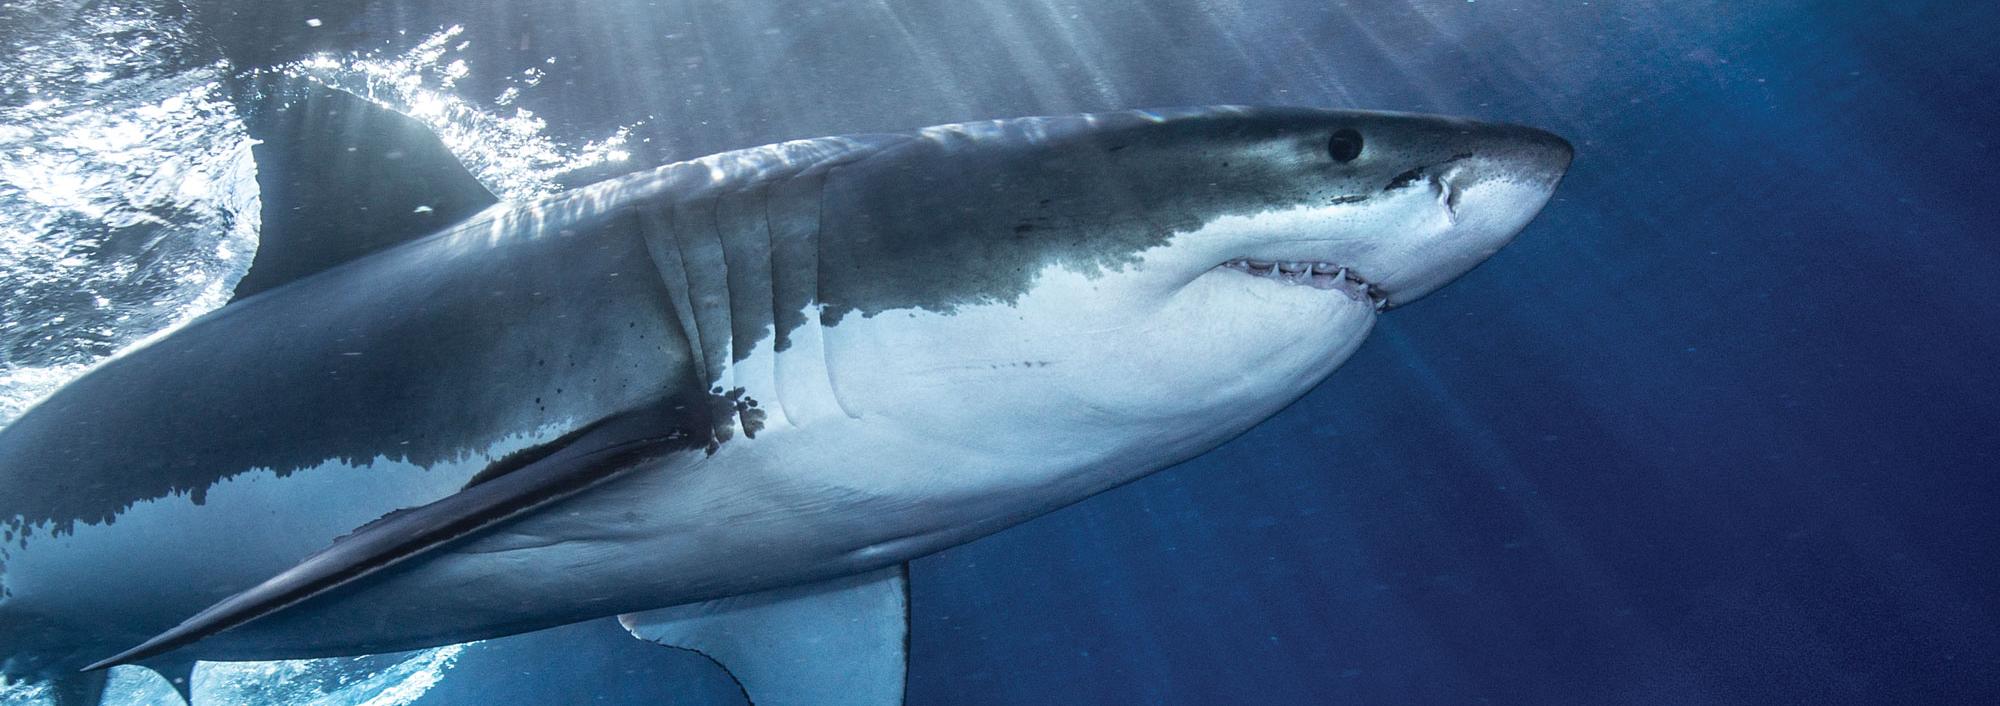 Great White Shark swimming underwater with the title "Shark 4-D Experience" above it